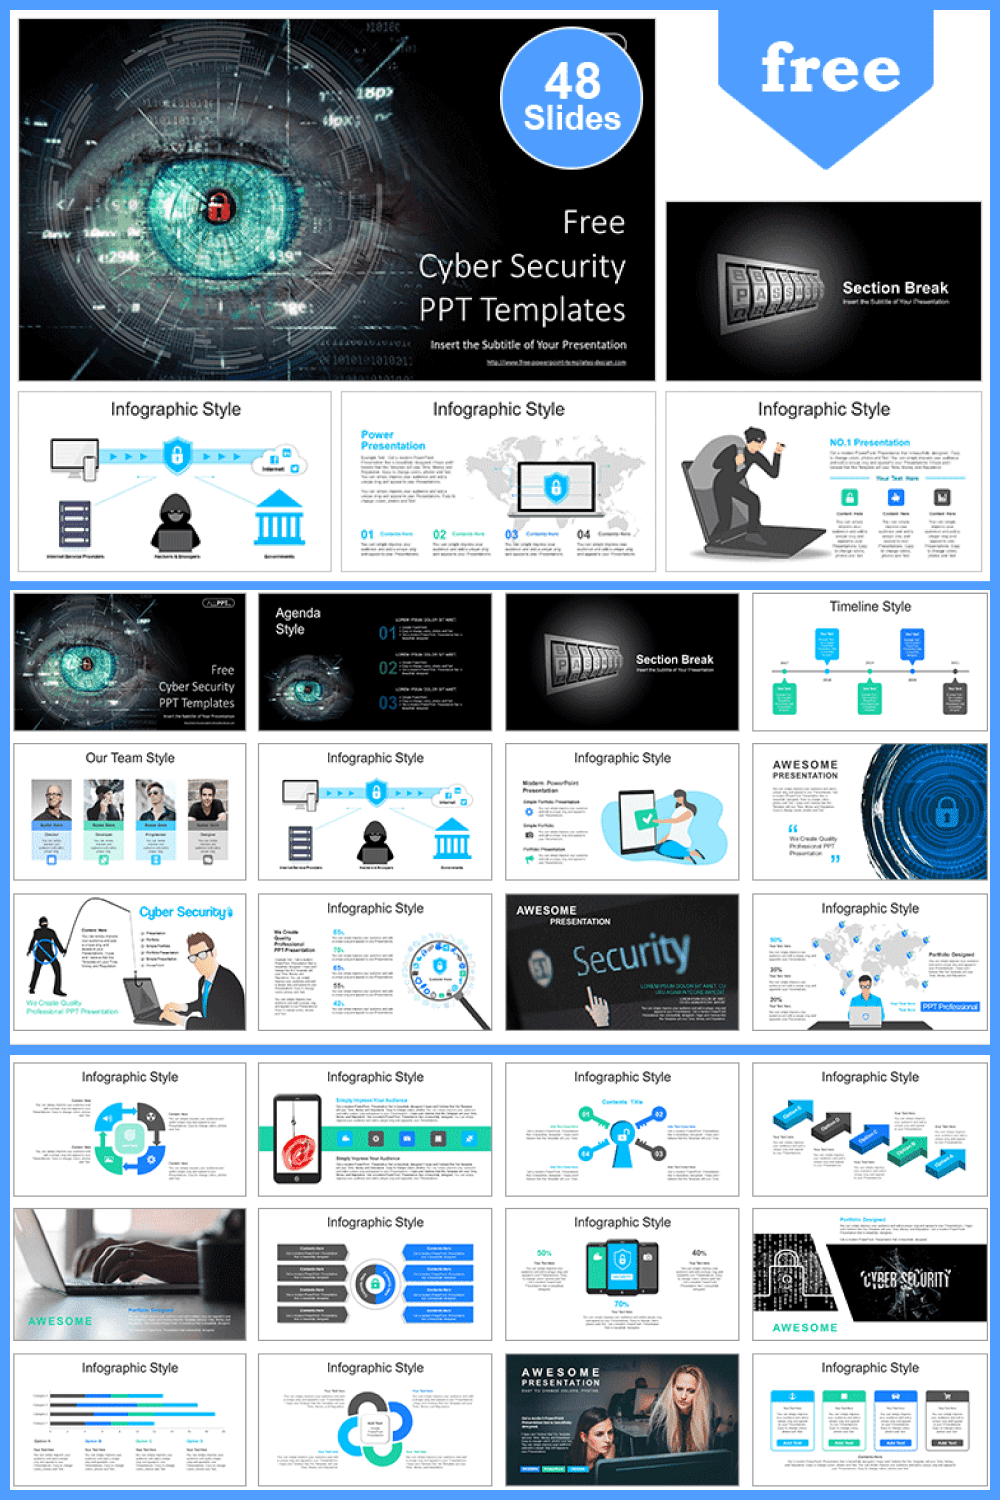 Cyber Security powerpoint templates.